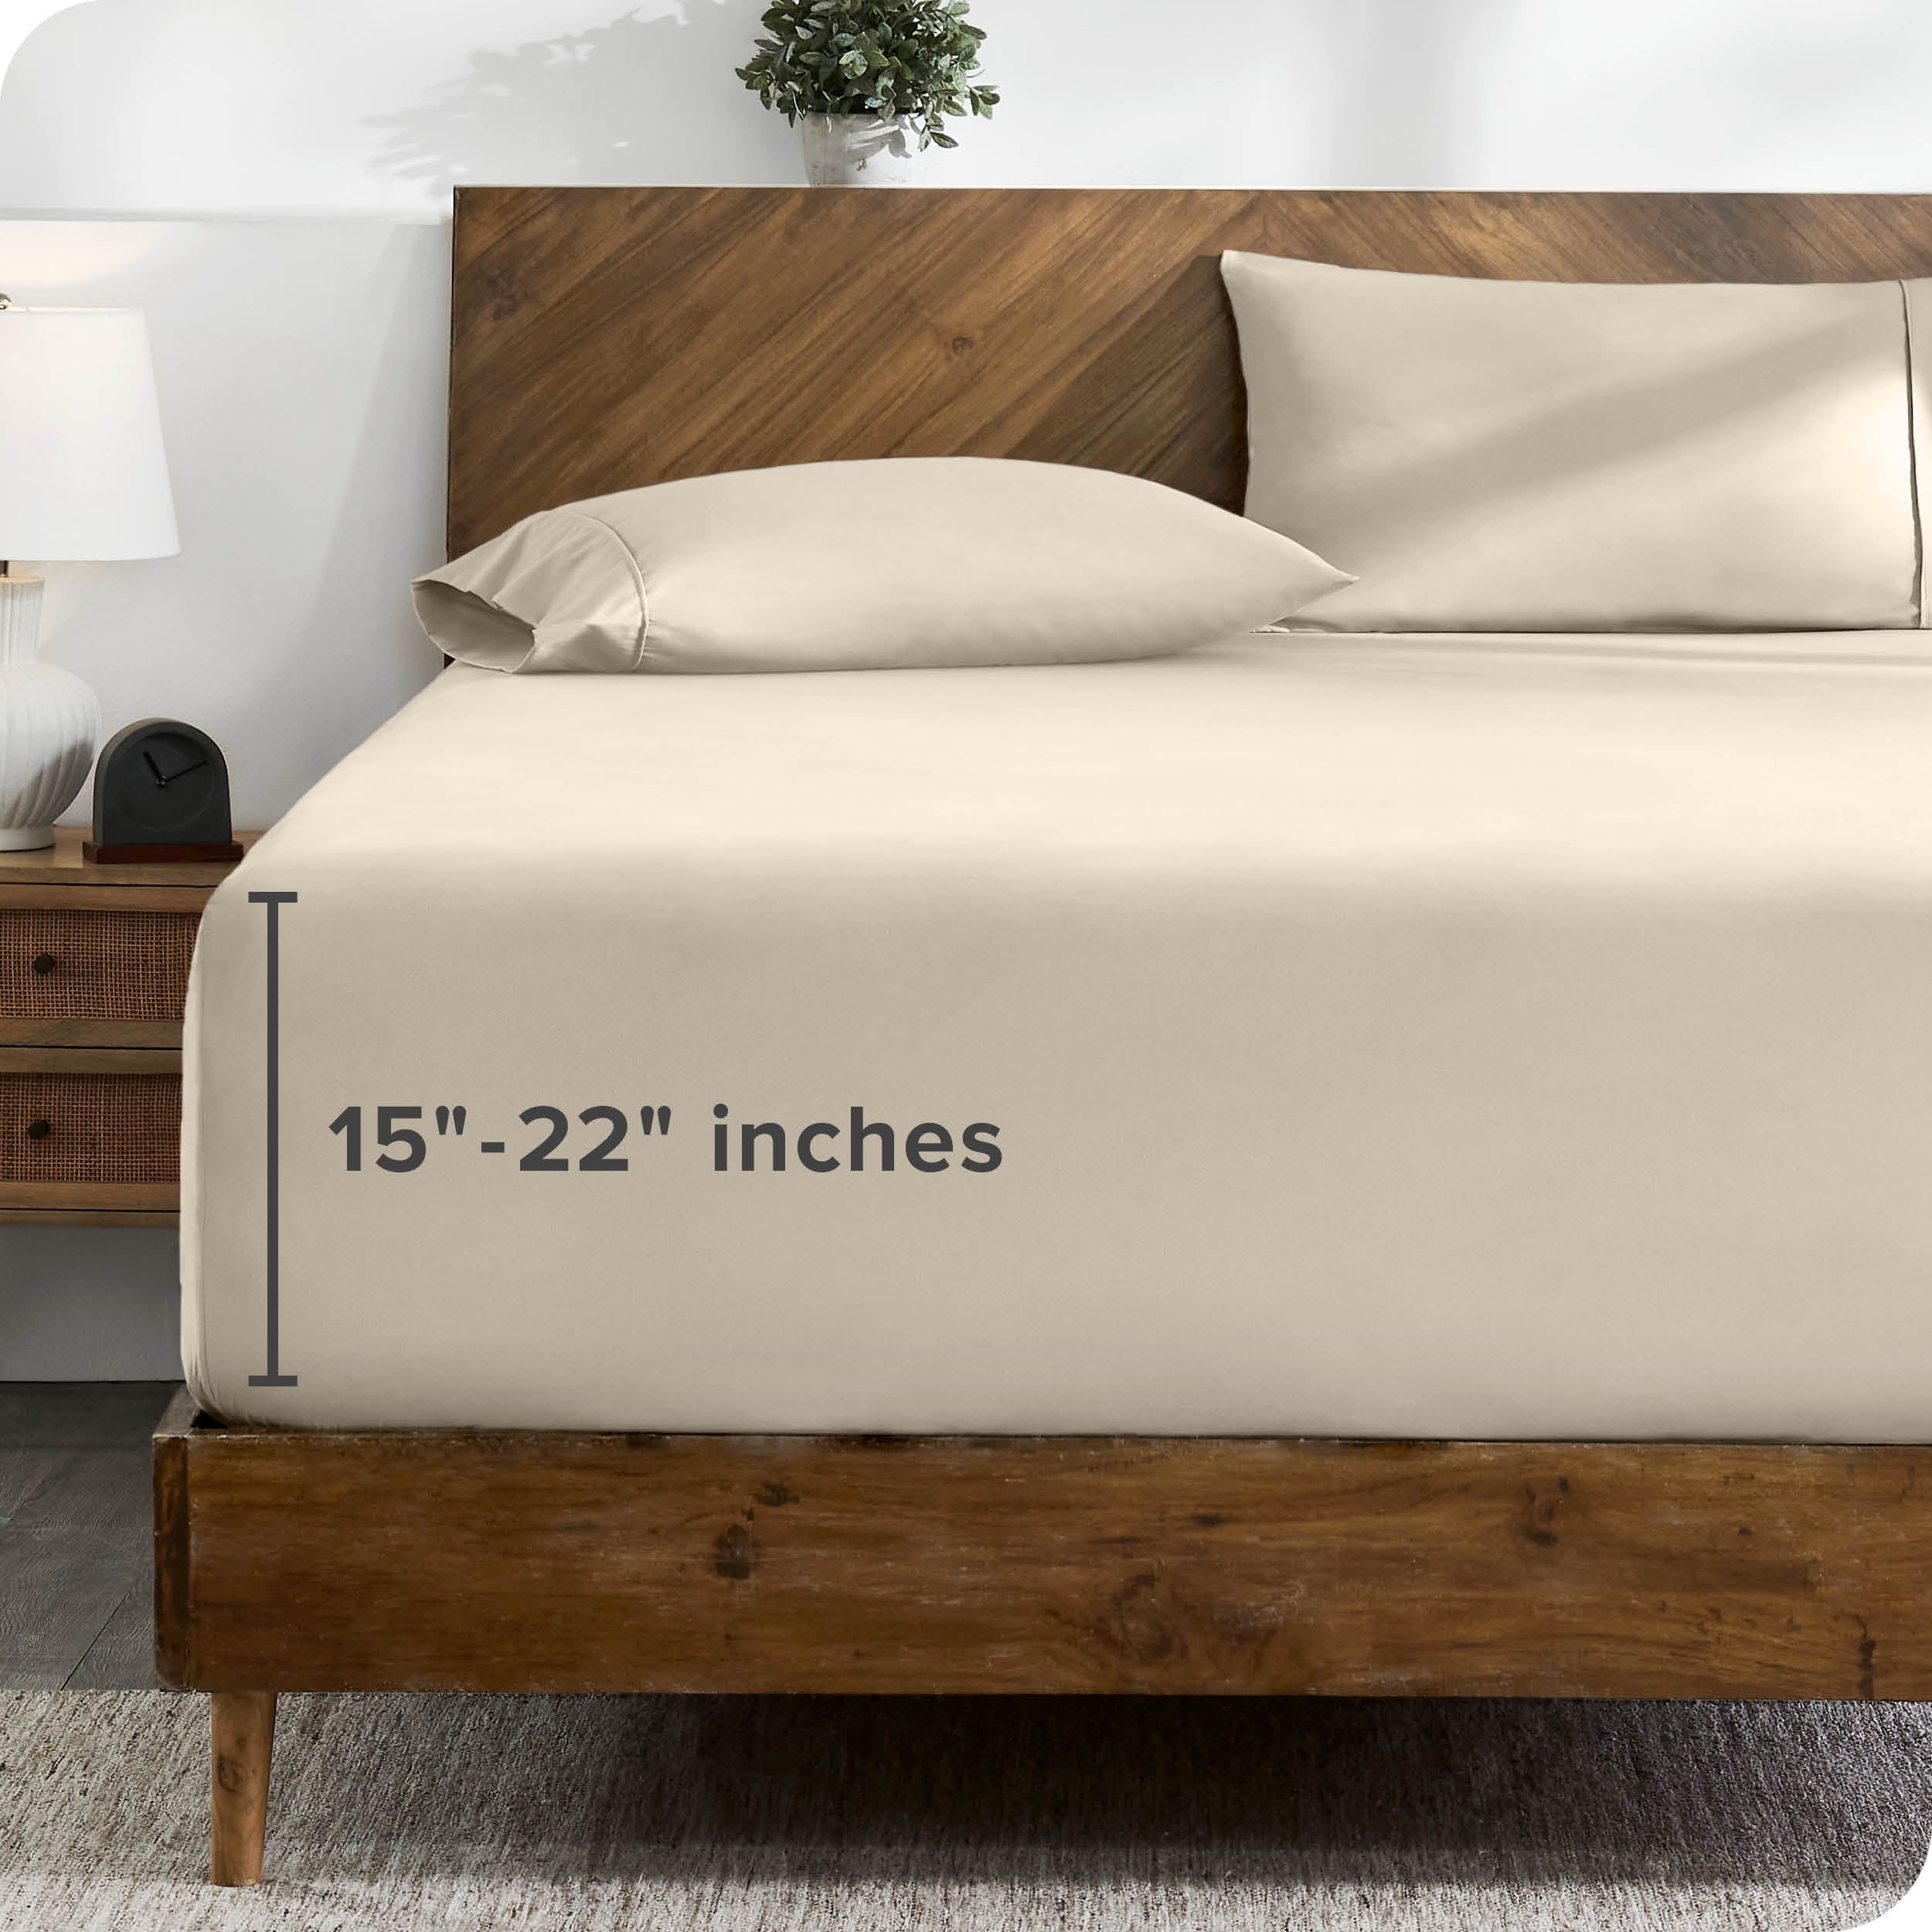 https://ak1.ostkcdn.com/images/products/is/images/direct/b7e907568caa7e6b6659c8a9743ec801c543e6ad/Bare-Home-Ultra-Soft-Microfiber-22-Inch-Extra-Deep-Pocket-Fitted-Sheet.jpg